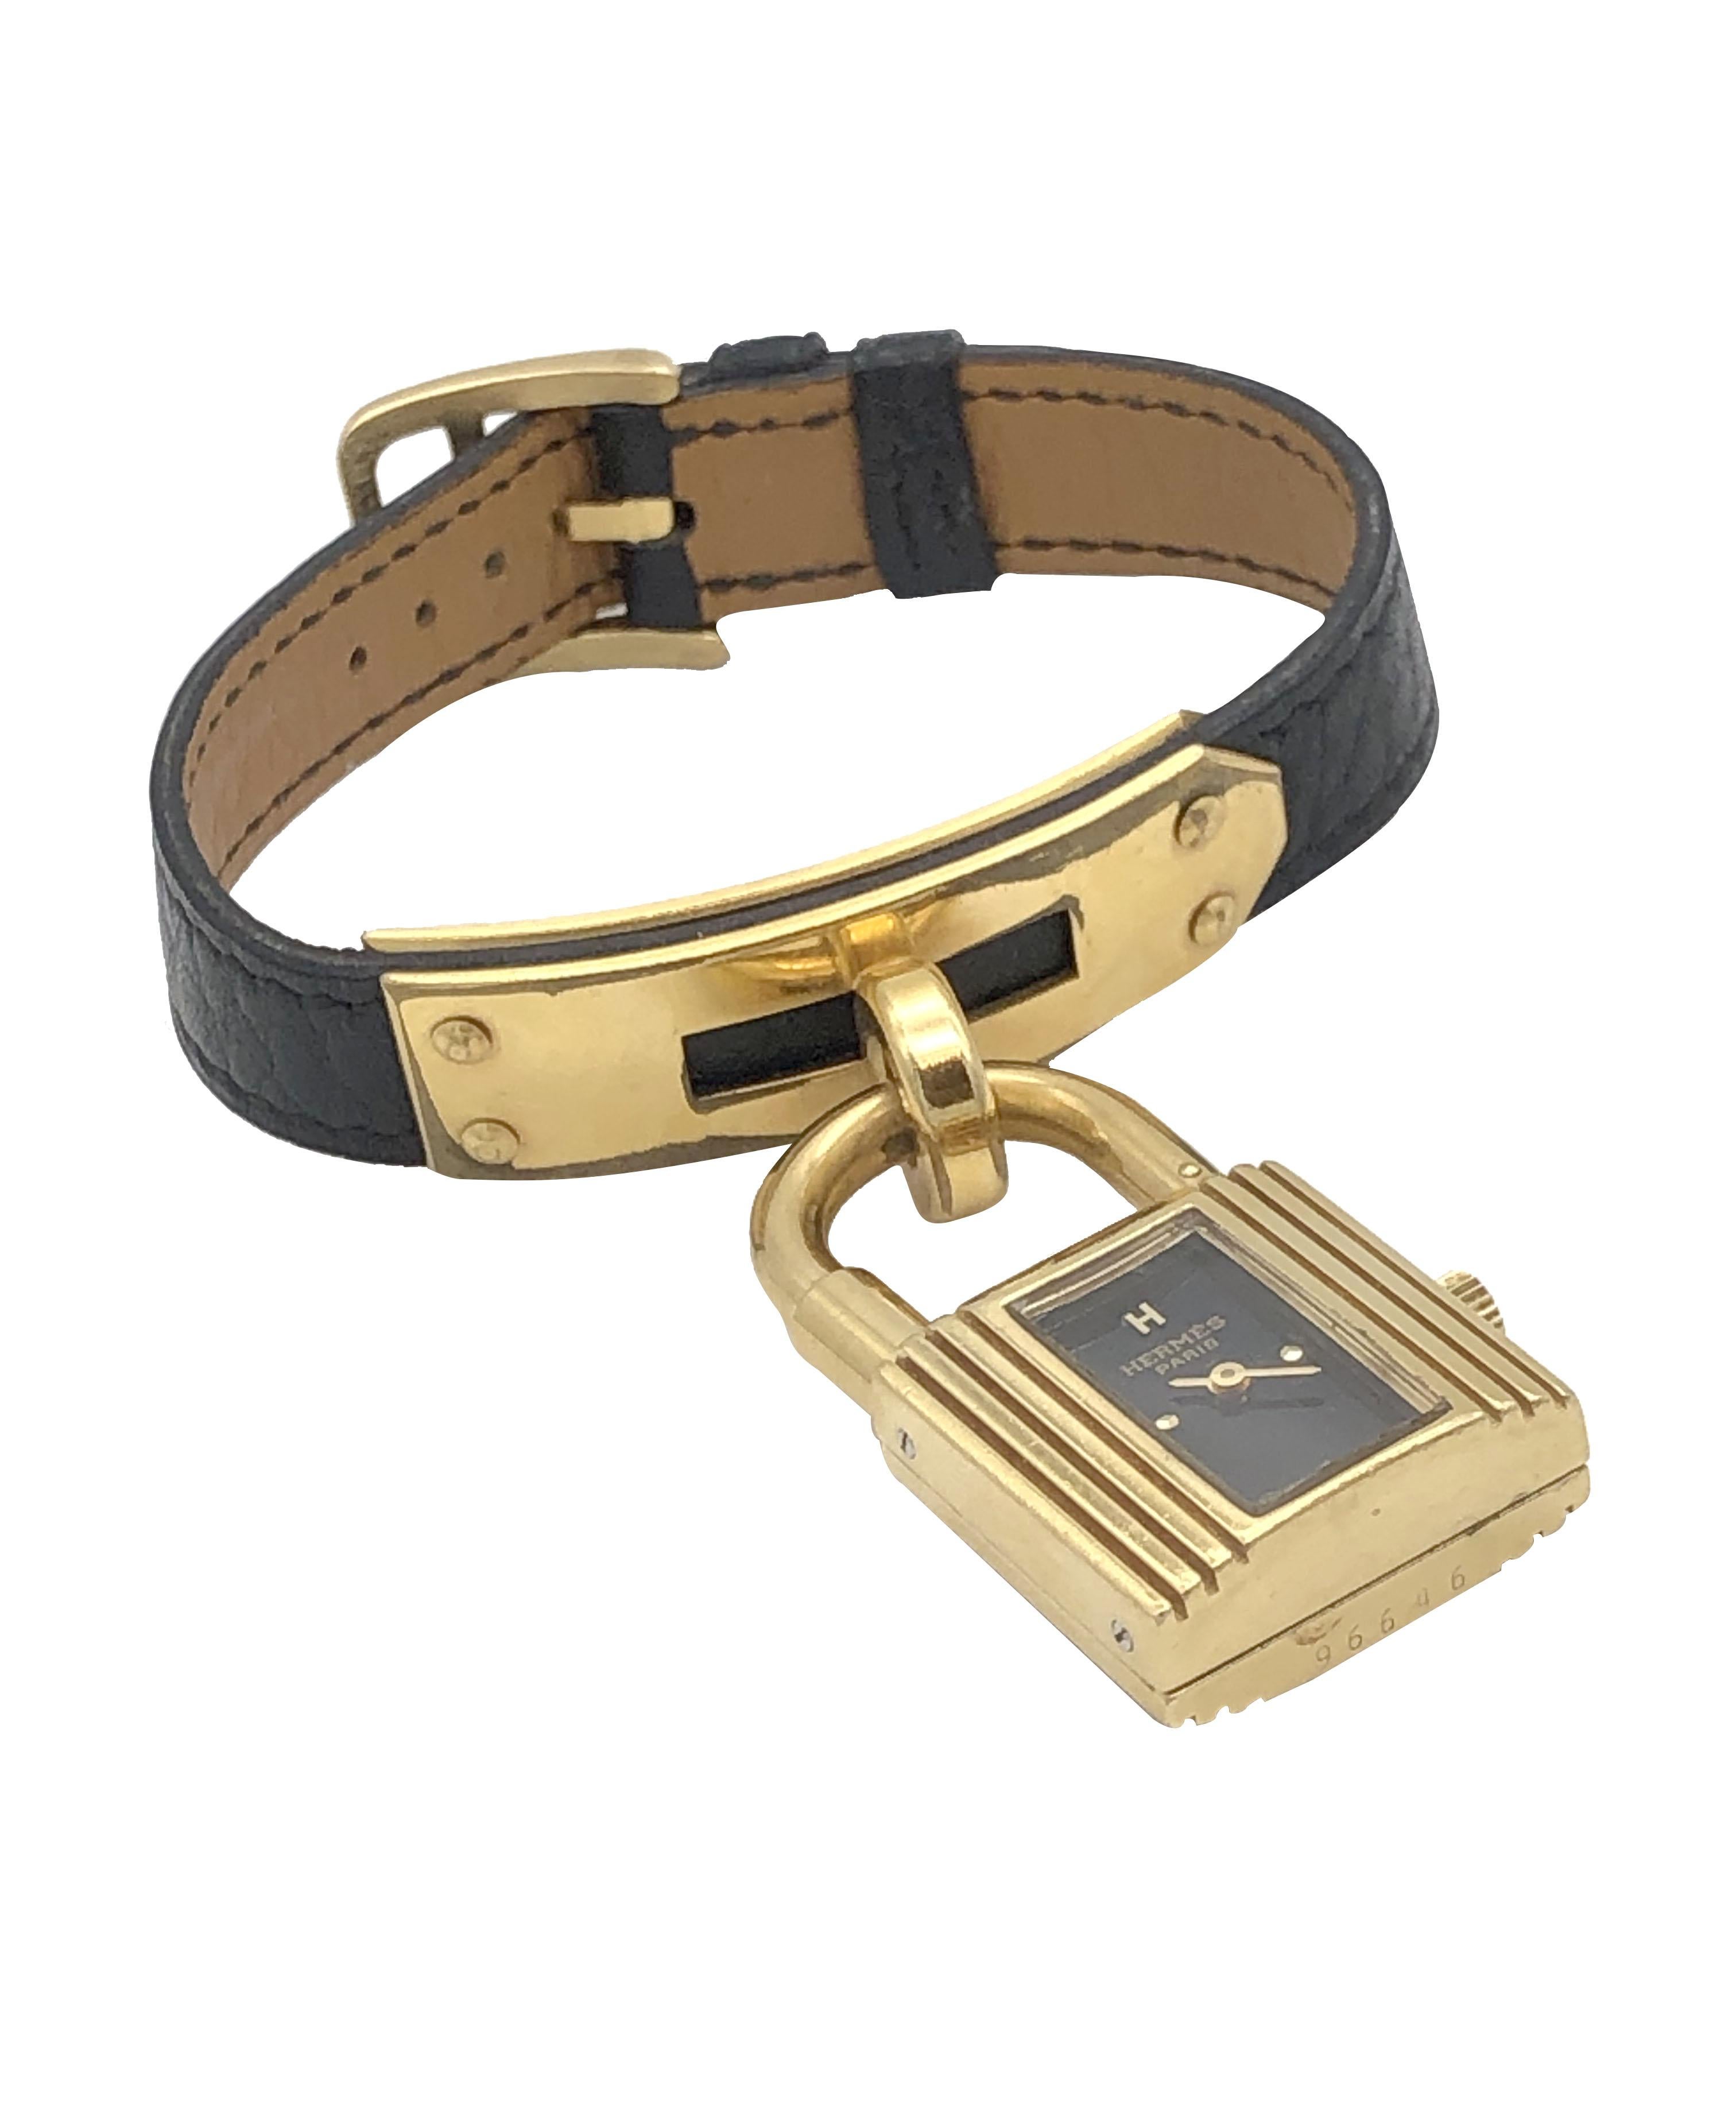 Circa 2000 Hermes Kelly collection Ladies Wrist watch, 1 7/8 inch  X  3/4 inch Gold tone Lock form watch, Quartz movement, Black dial, Black Leather strap with tang buckle, watch length 7 1/4 inches and is adjustable.